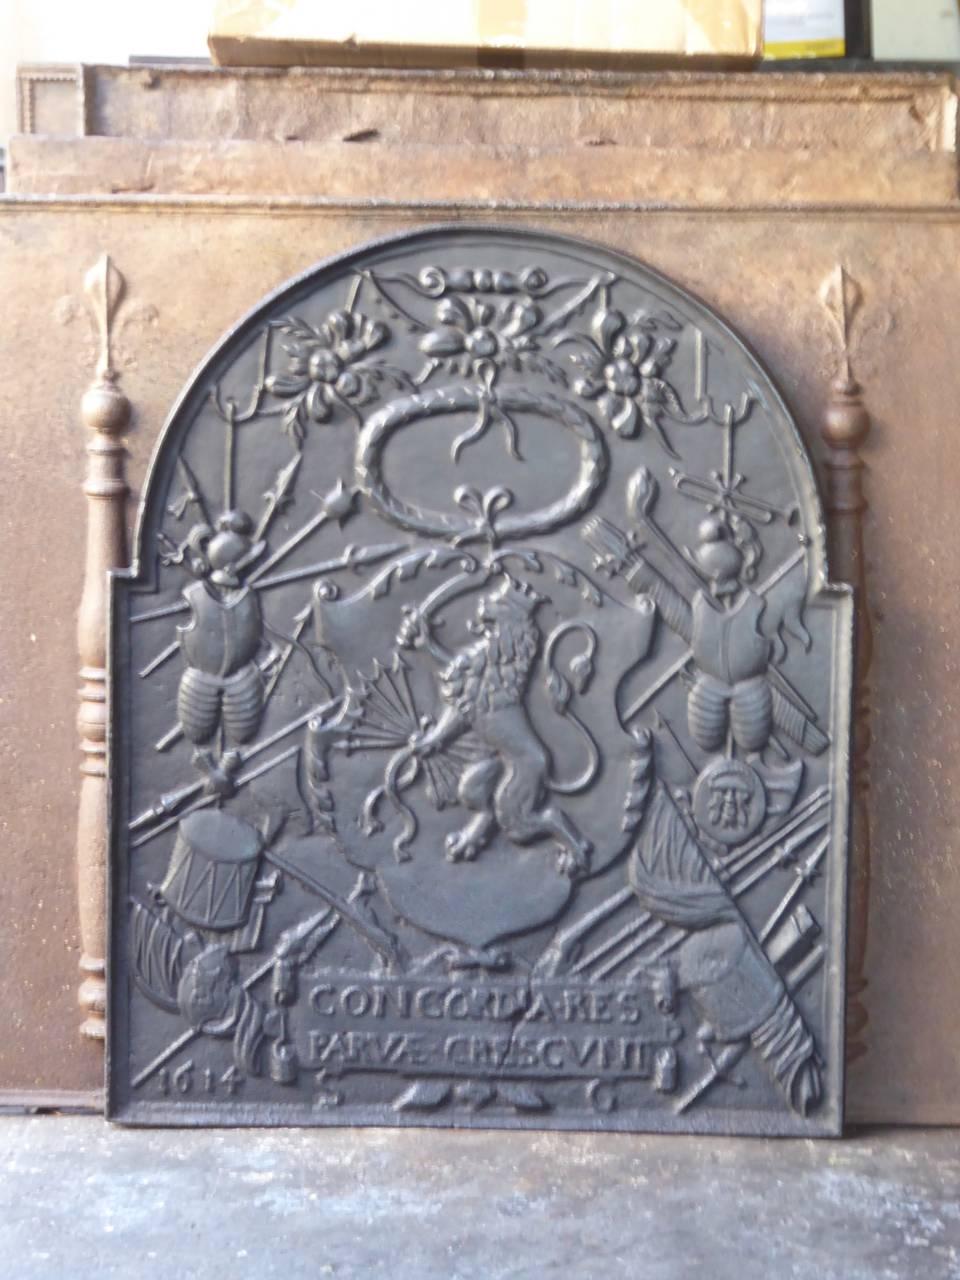 17th century Dutch Louis XIV fireback with a coat of arms. The fireback is made of cast iron. It depicts the Dutch lion with seven spears, symbolizing the seven provinces of the Dutch Republic in the 17th century. The text 'Concordia res parvae